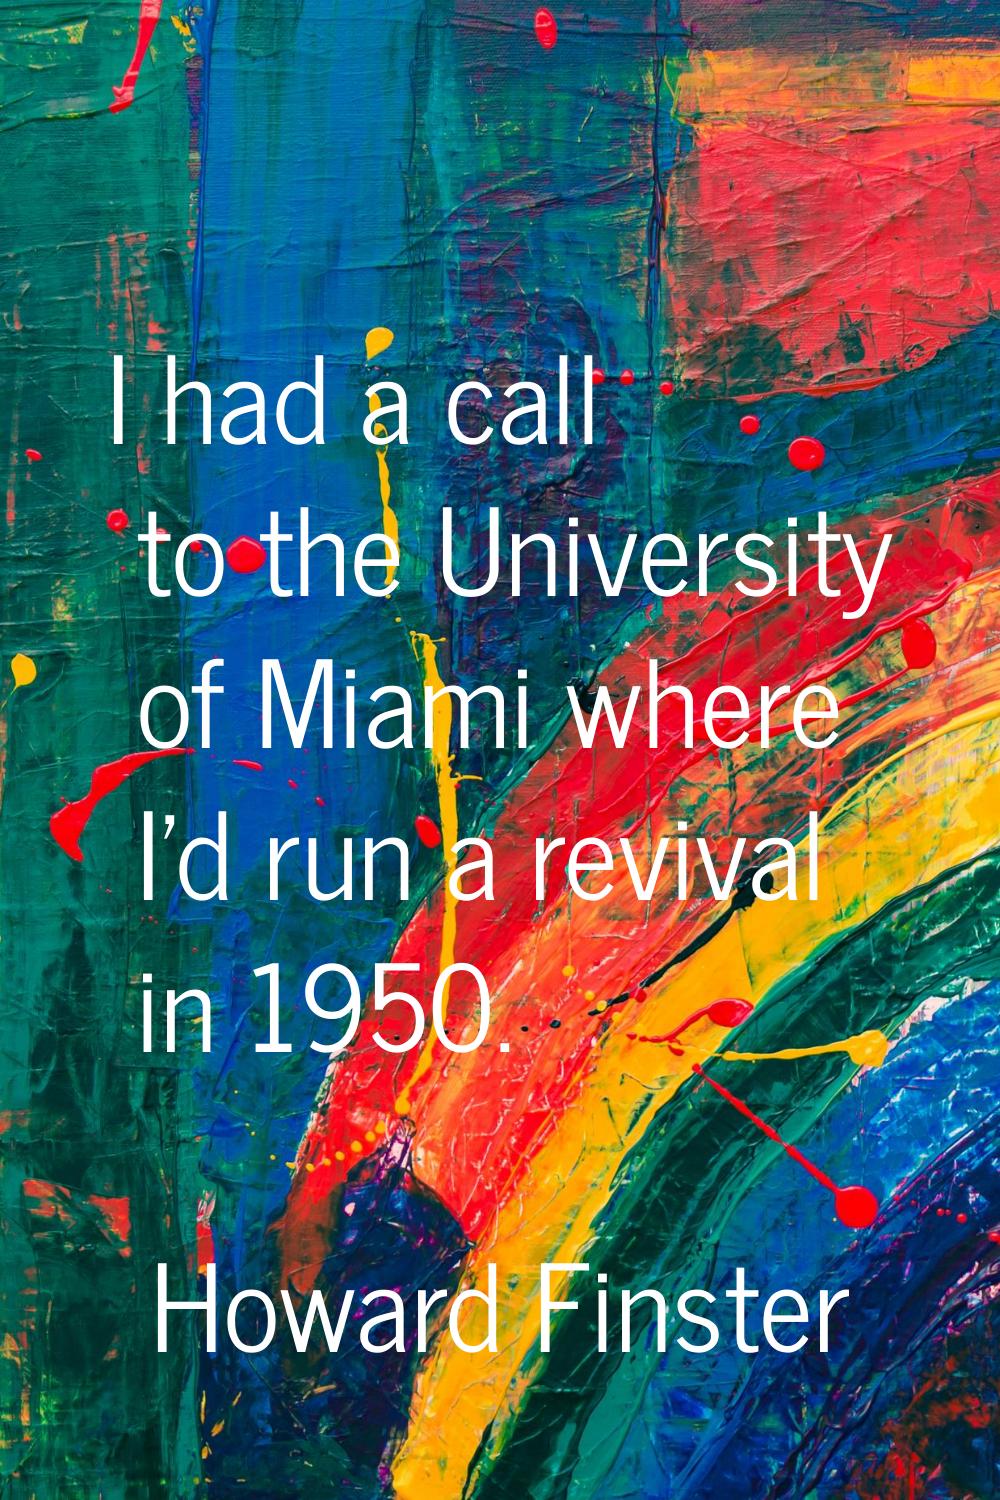 I had a call to the University of Miami where I'd run a revival in 1950.